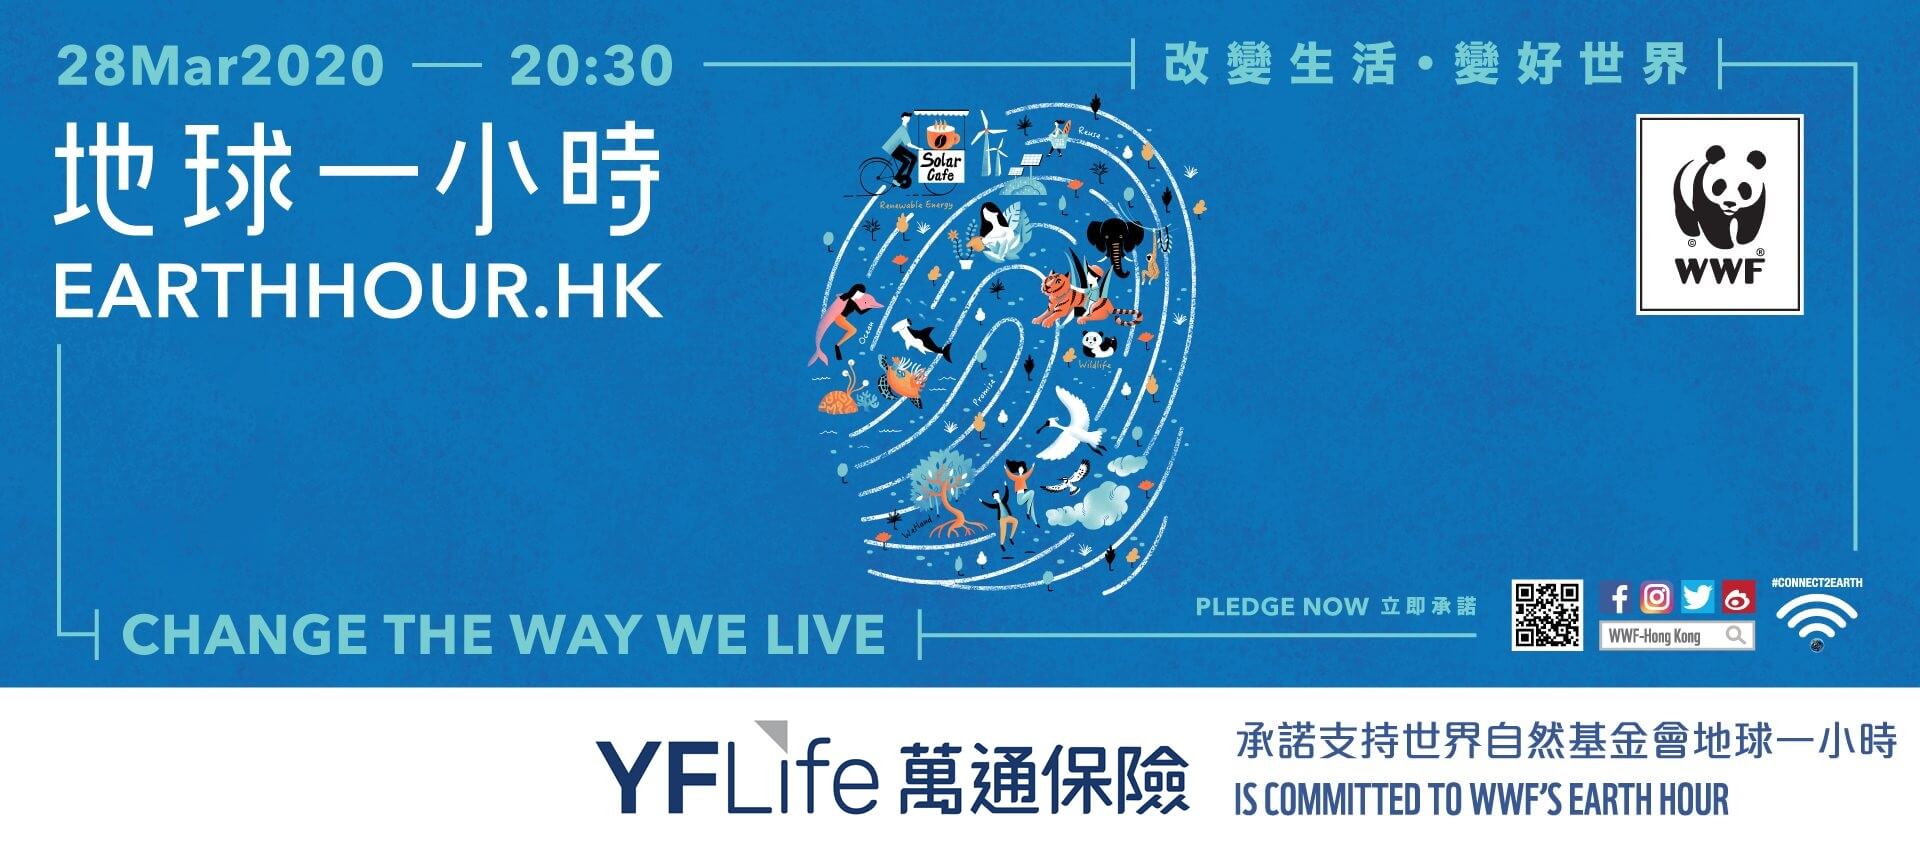 YF Life pledged to support the Earth Hour 2020 and encouraged consultants and staff to live sustainably.